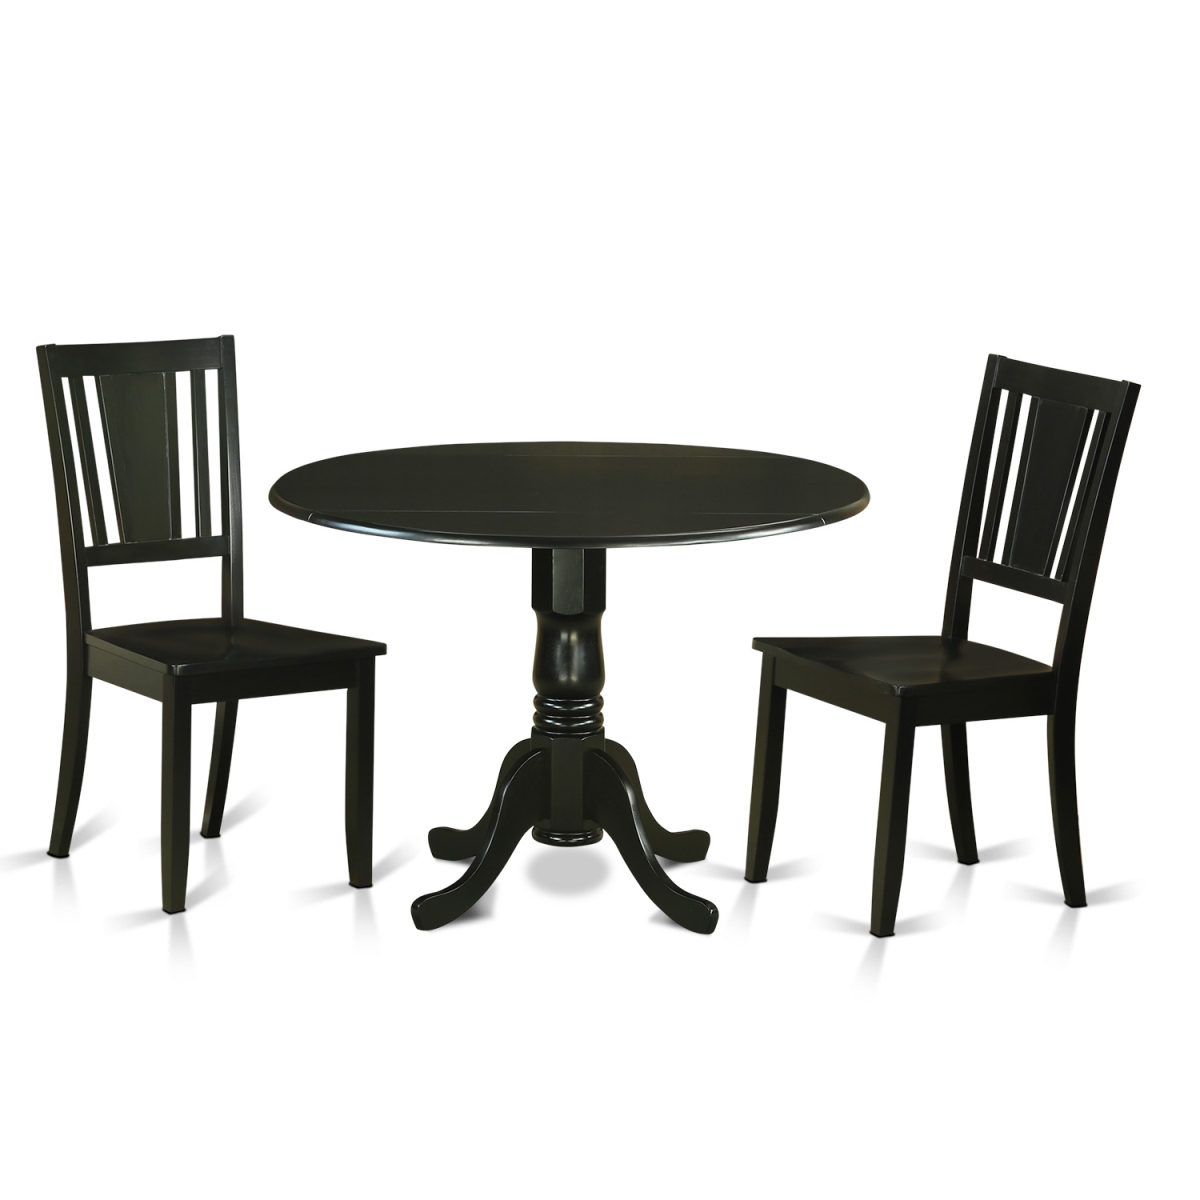 Picture of East West Furniture DLDU3-BLK-W Table & Chairs Set - Dining Room Table & 2 Chairs, Black - 3 Piece